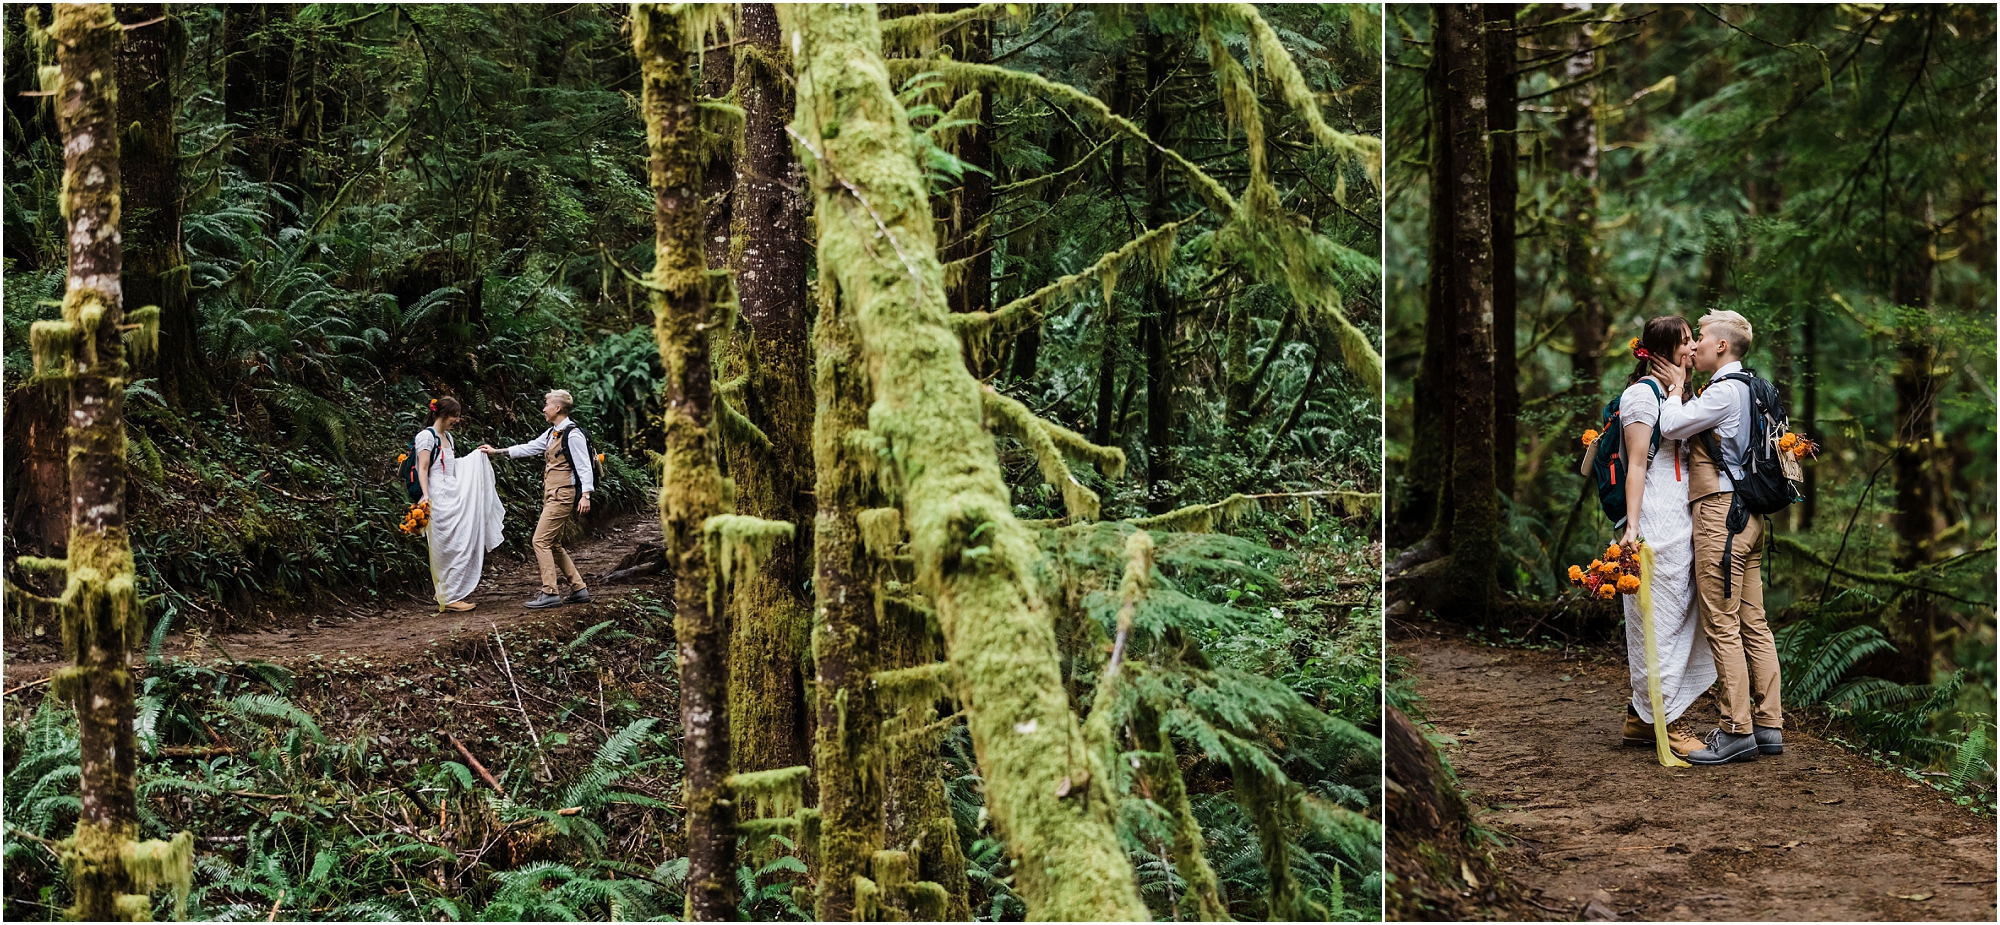 Mossy covered trees blanket the forest that this couple chose as their elopement location in the PNW. | Erica Swantek Photography